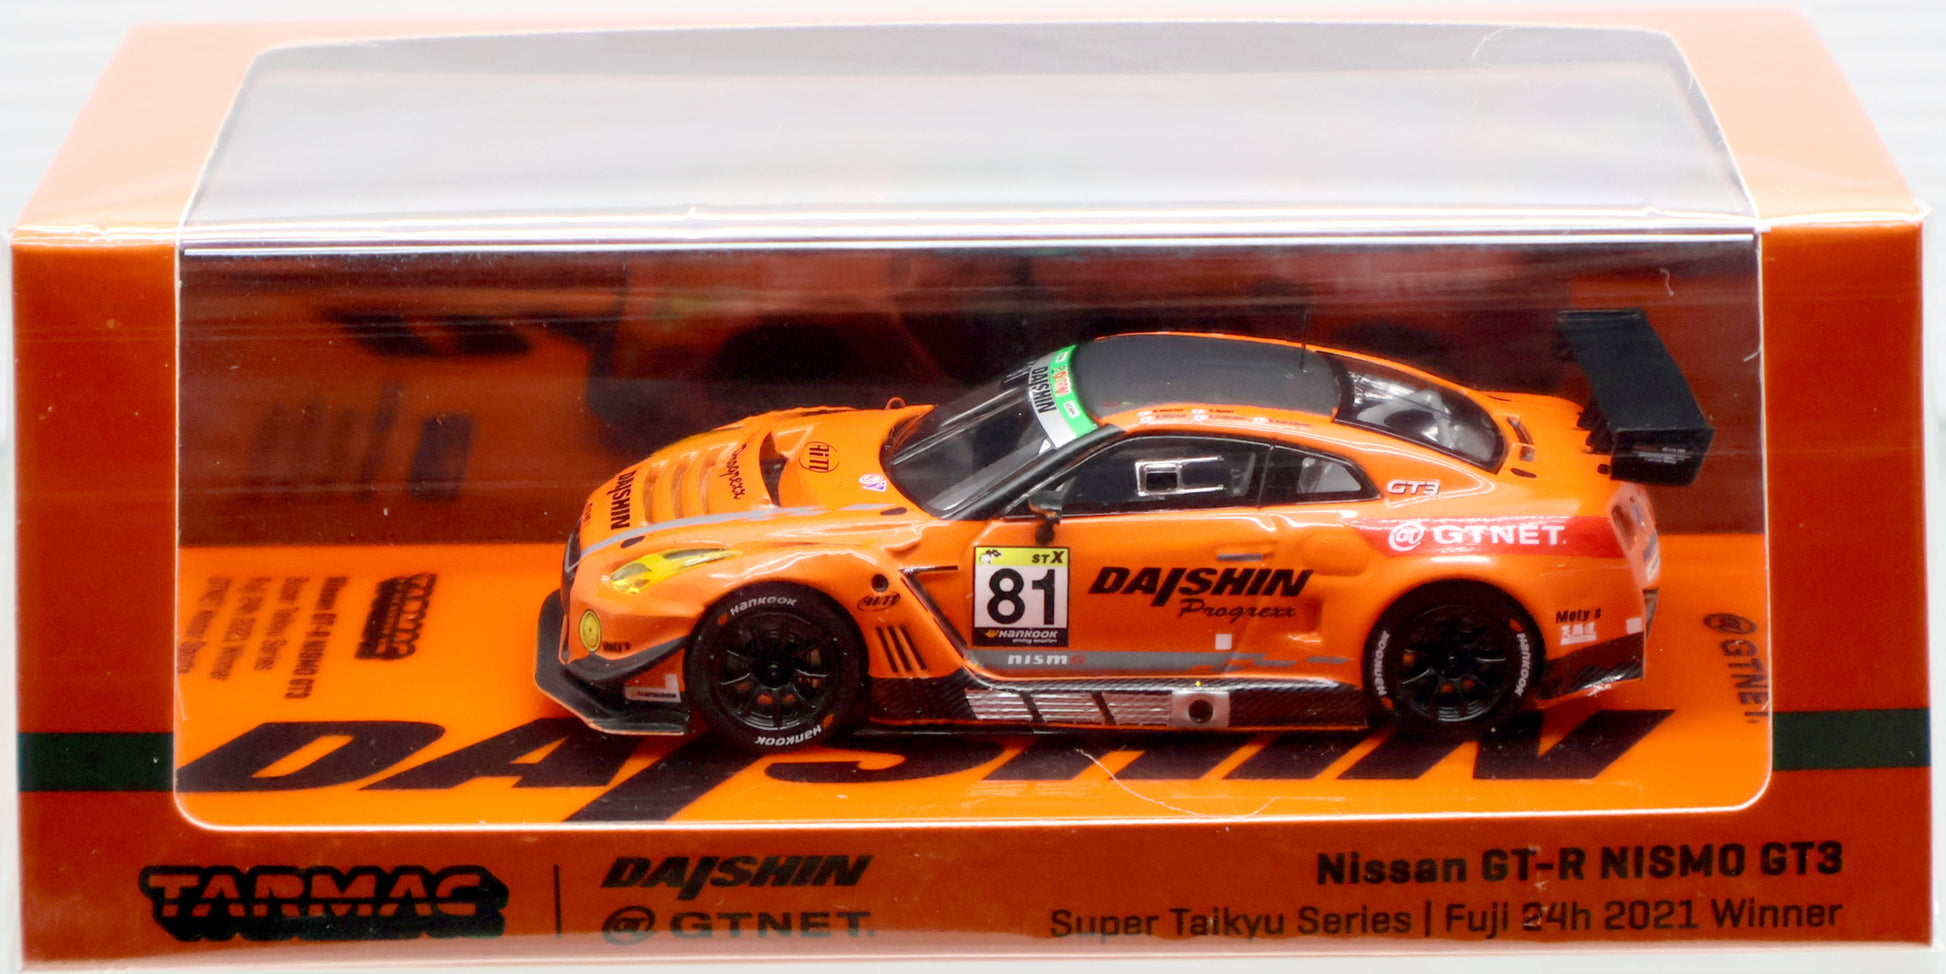 A 1/64 scale die-cast model of the Nissan GT-R NISMO GT3, winner of the 2021 Fuji 24 hours Super Taikyu Series by GTNET Motor Sports, produced by Tarmac Works. The model features detailed rims, rubber wheels, front and rear lights, and comes packaged in special packaging. Limited production run with SKU T64-035-21ST81 and barcode 9580015718851. Fully licensed product from Tarmac Works. Available at TatoyShop.com.